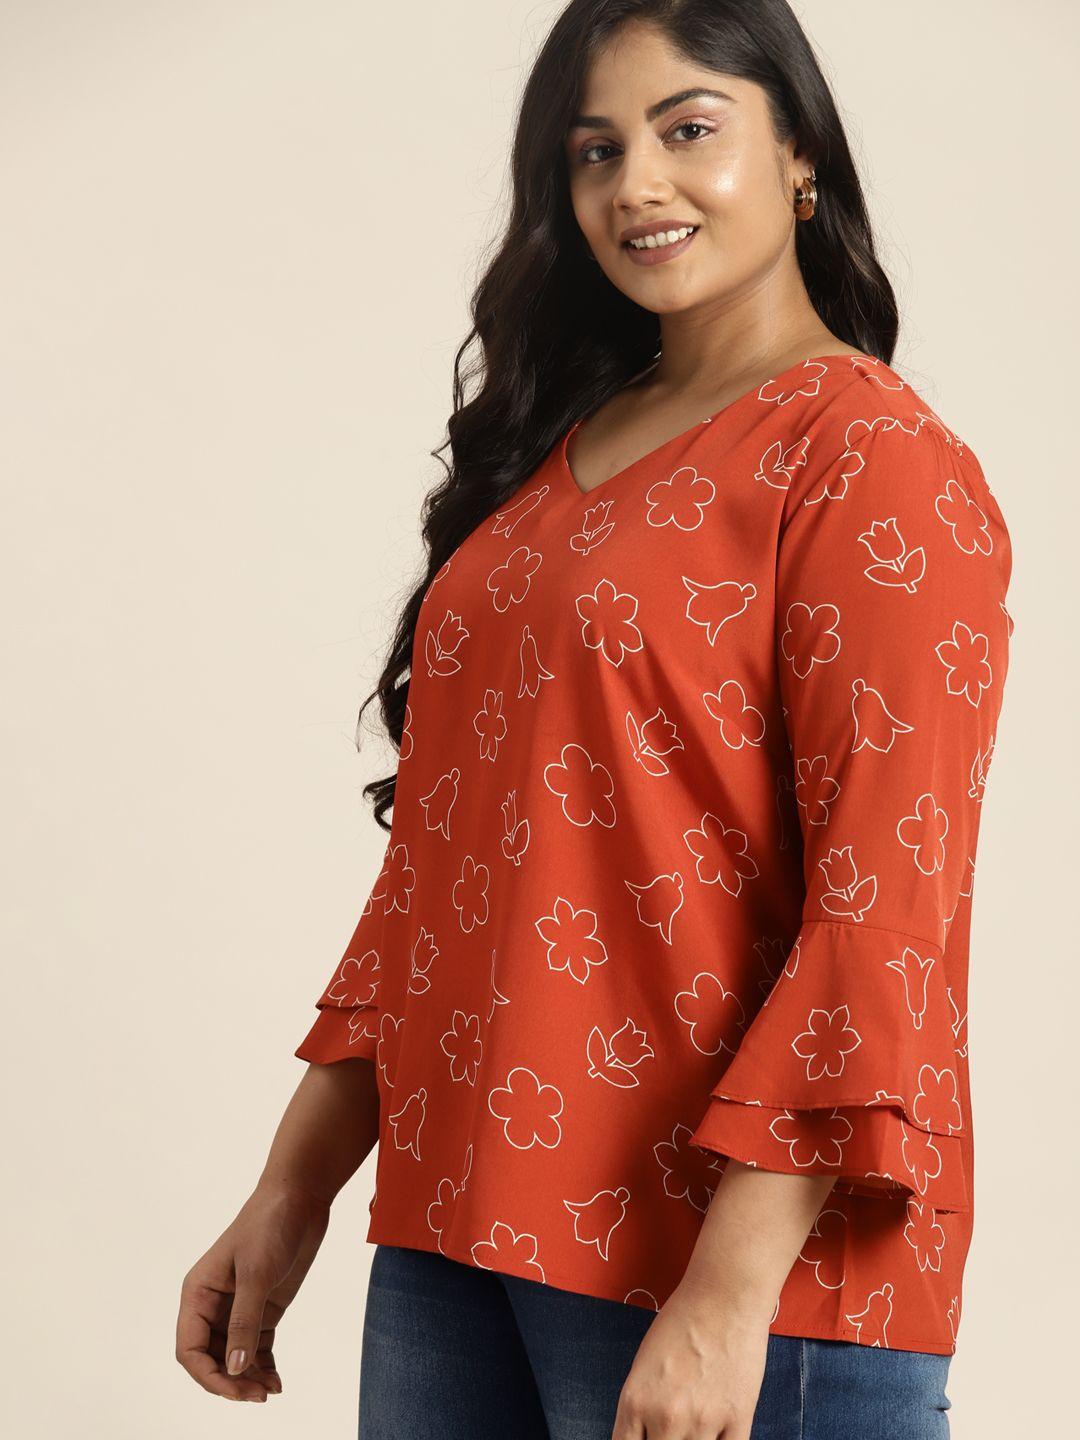 sztori plus size floral printed v-neck bell sleeves top